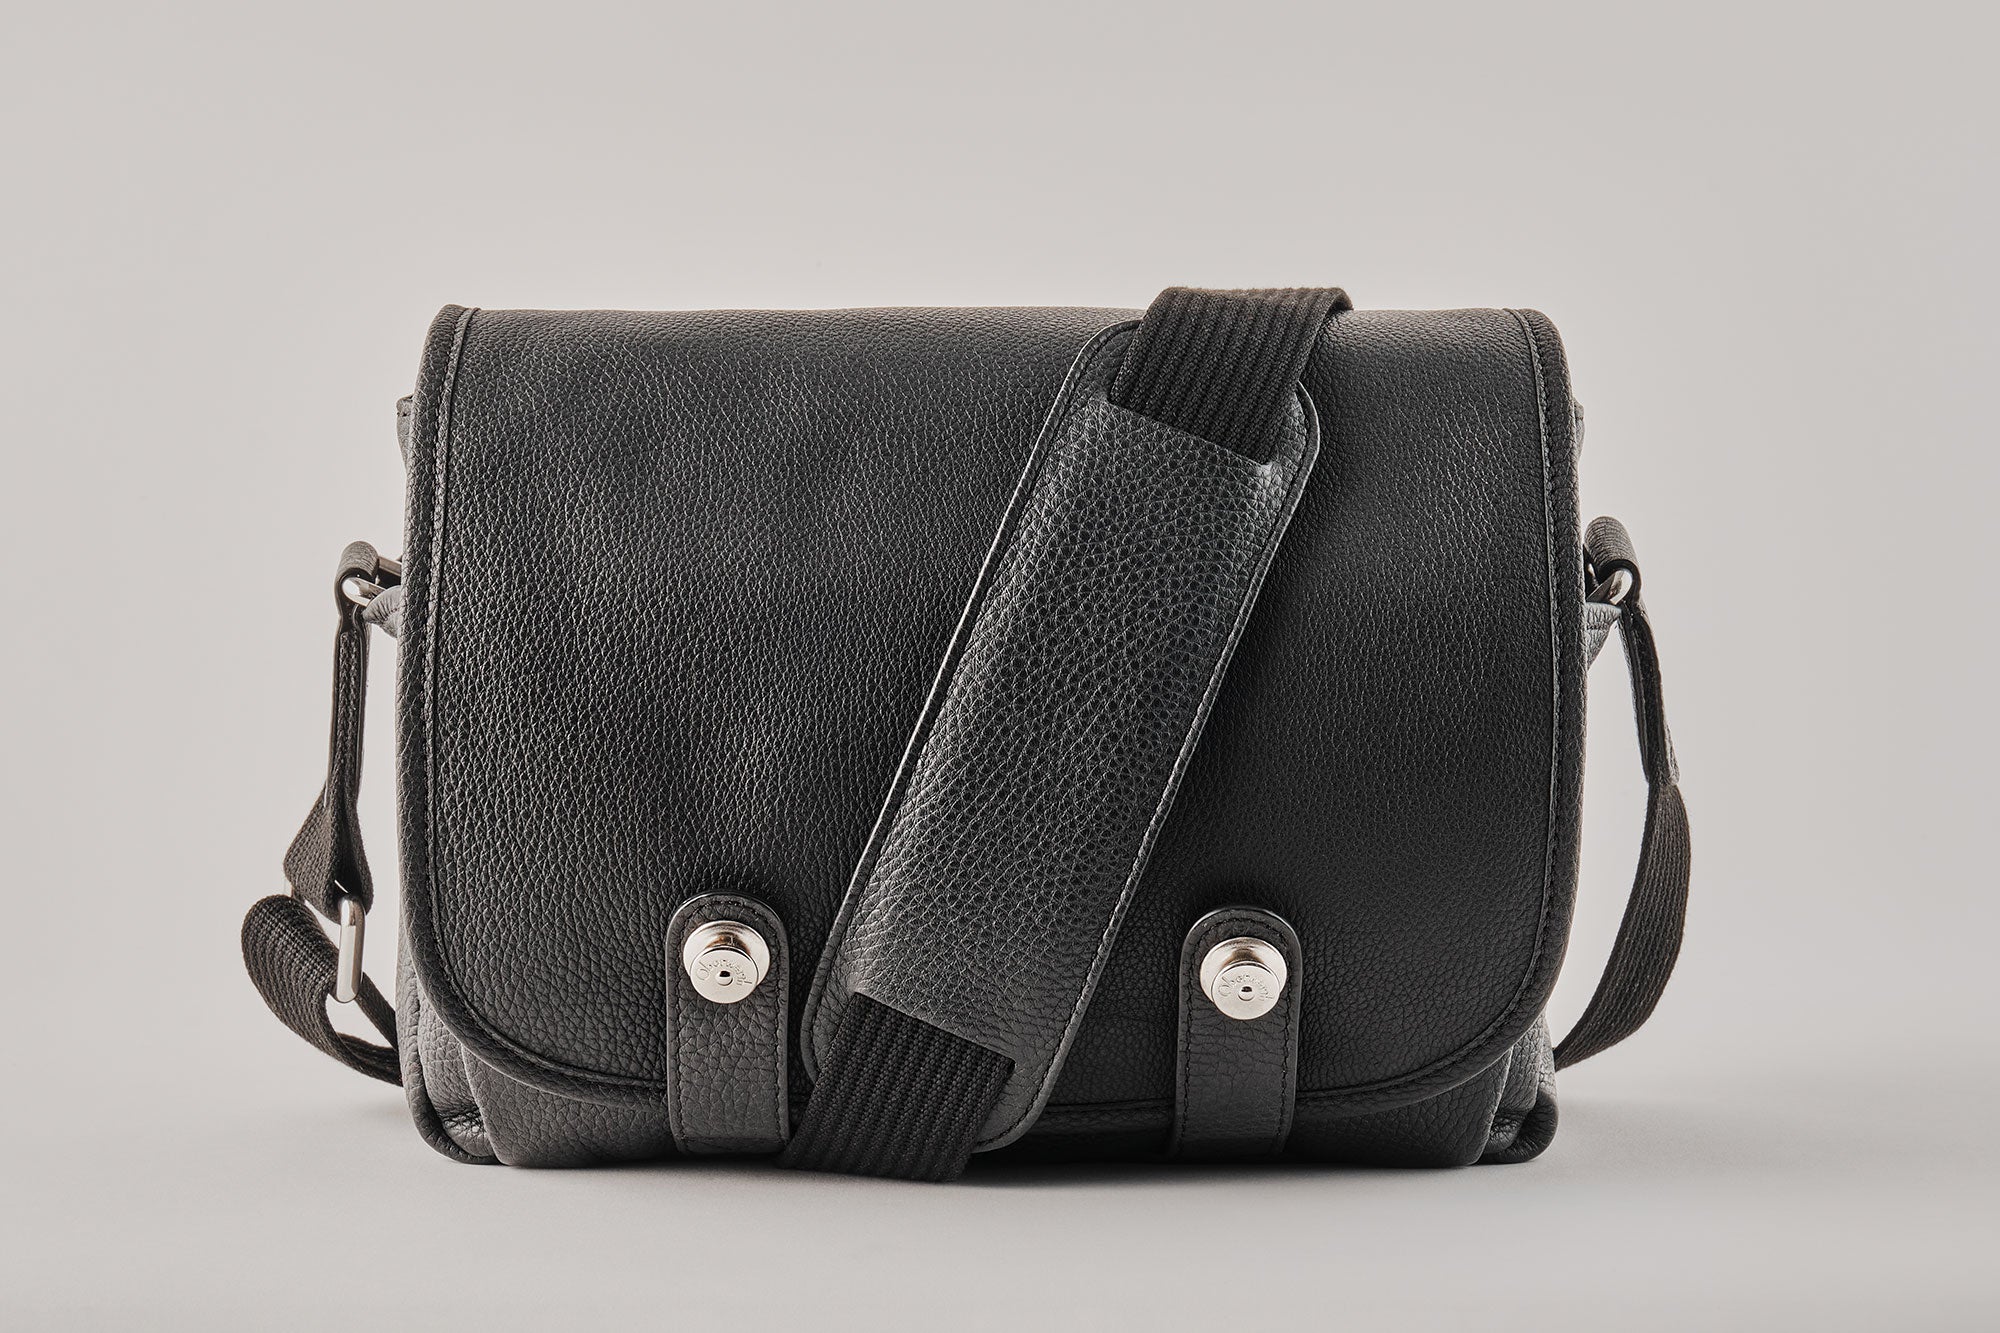 Medium Sally Bag in black leather with buckle and shoulder strap